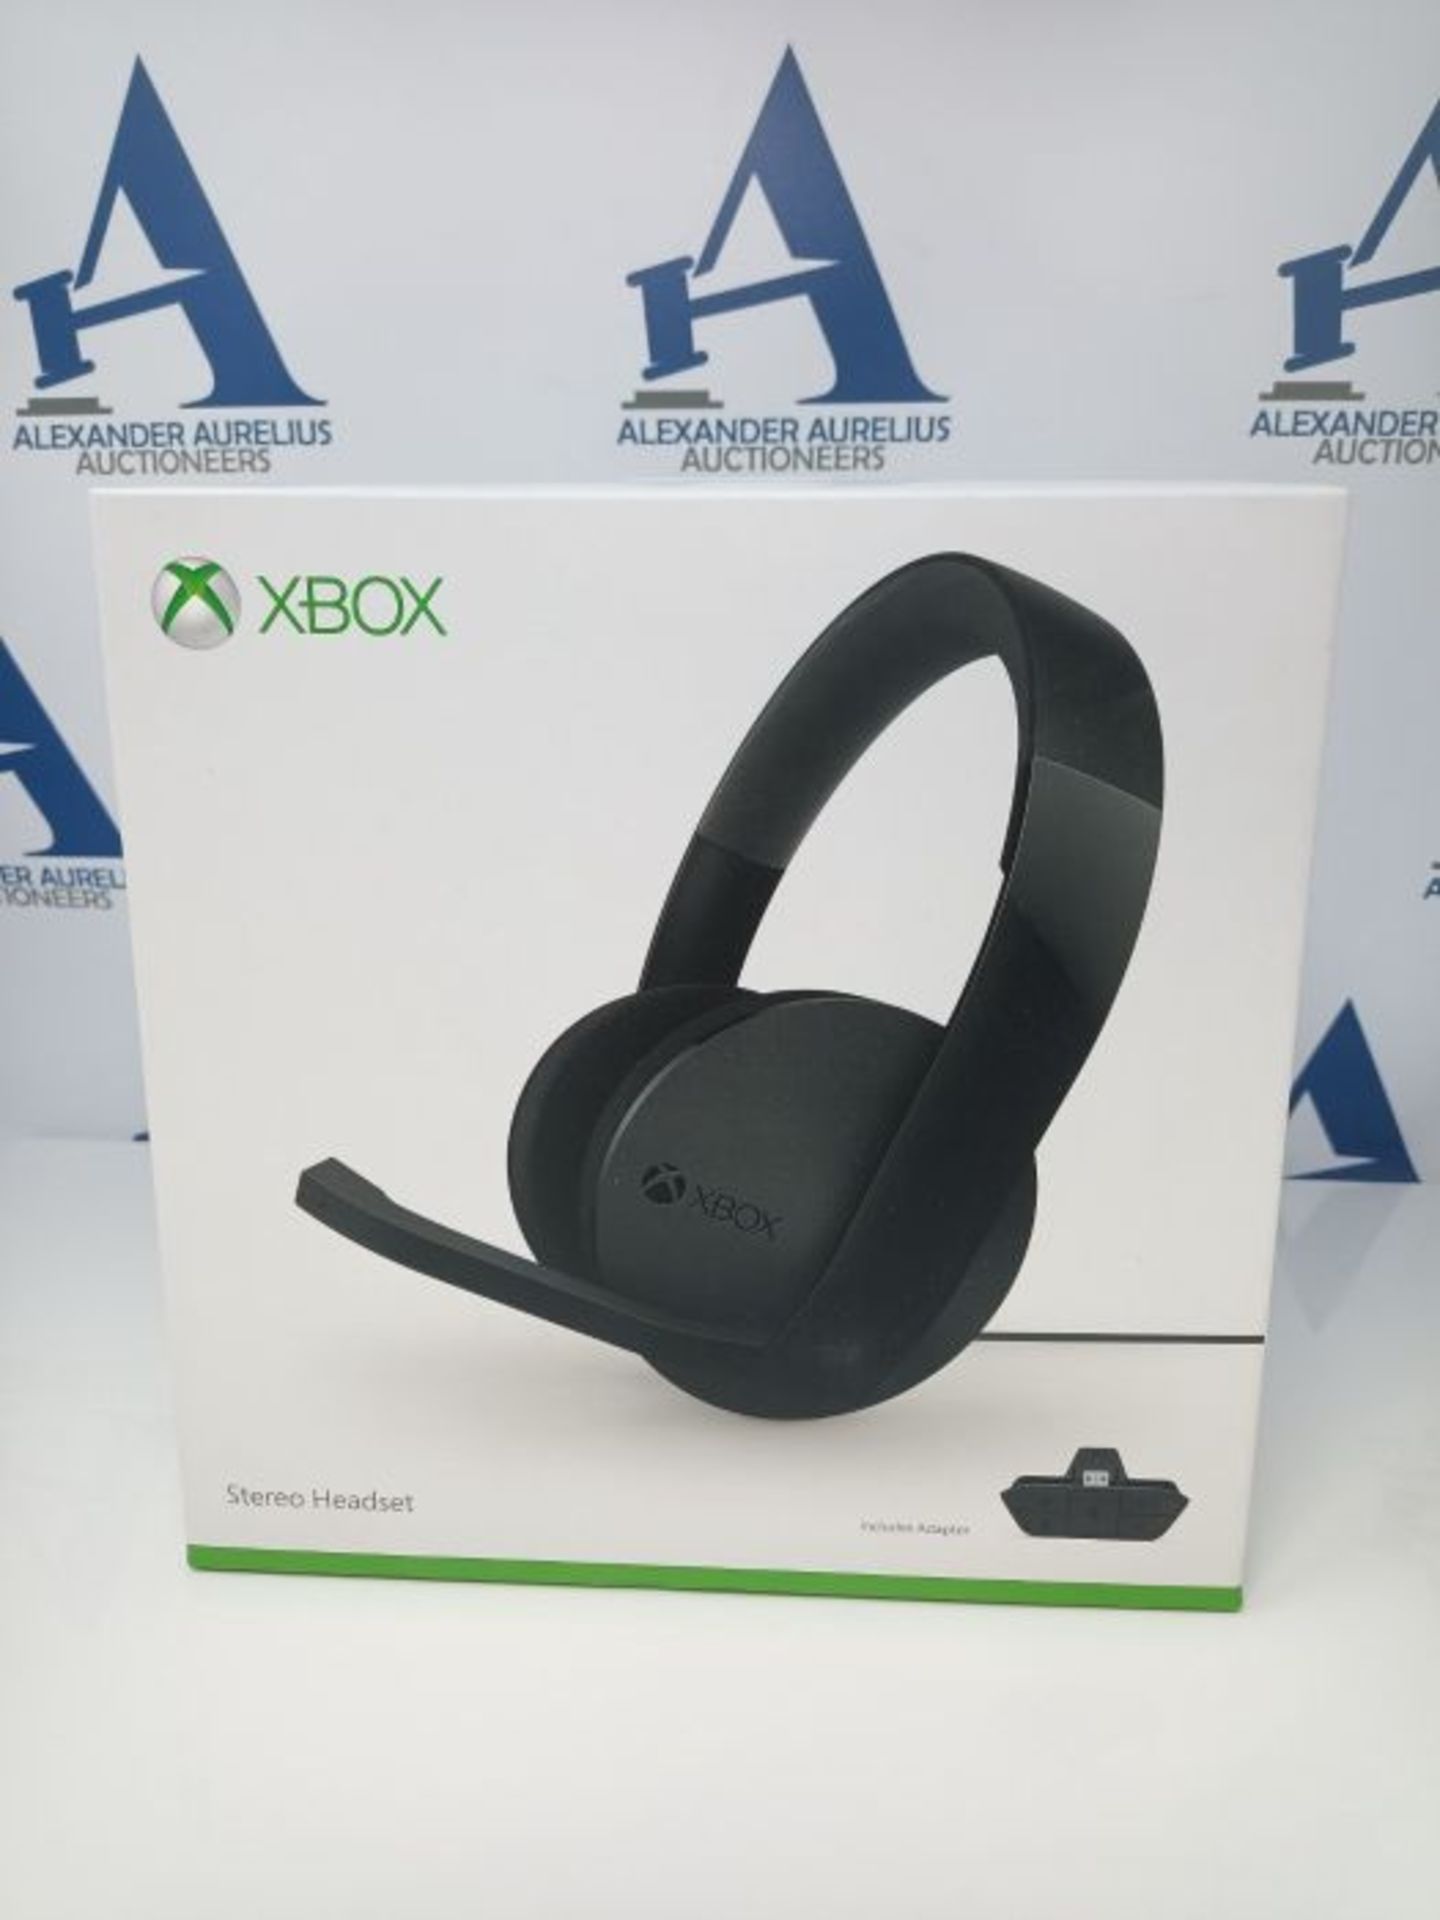 Xbox Stereo Headset - Image 2 of 3